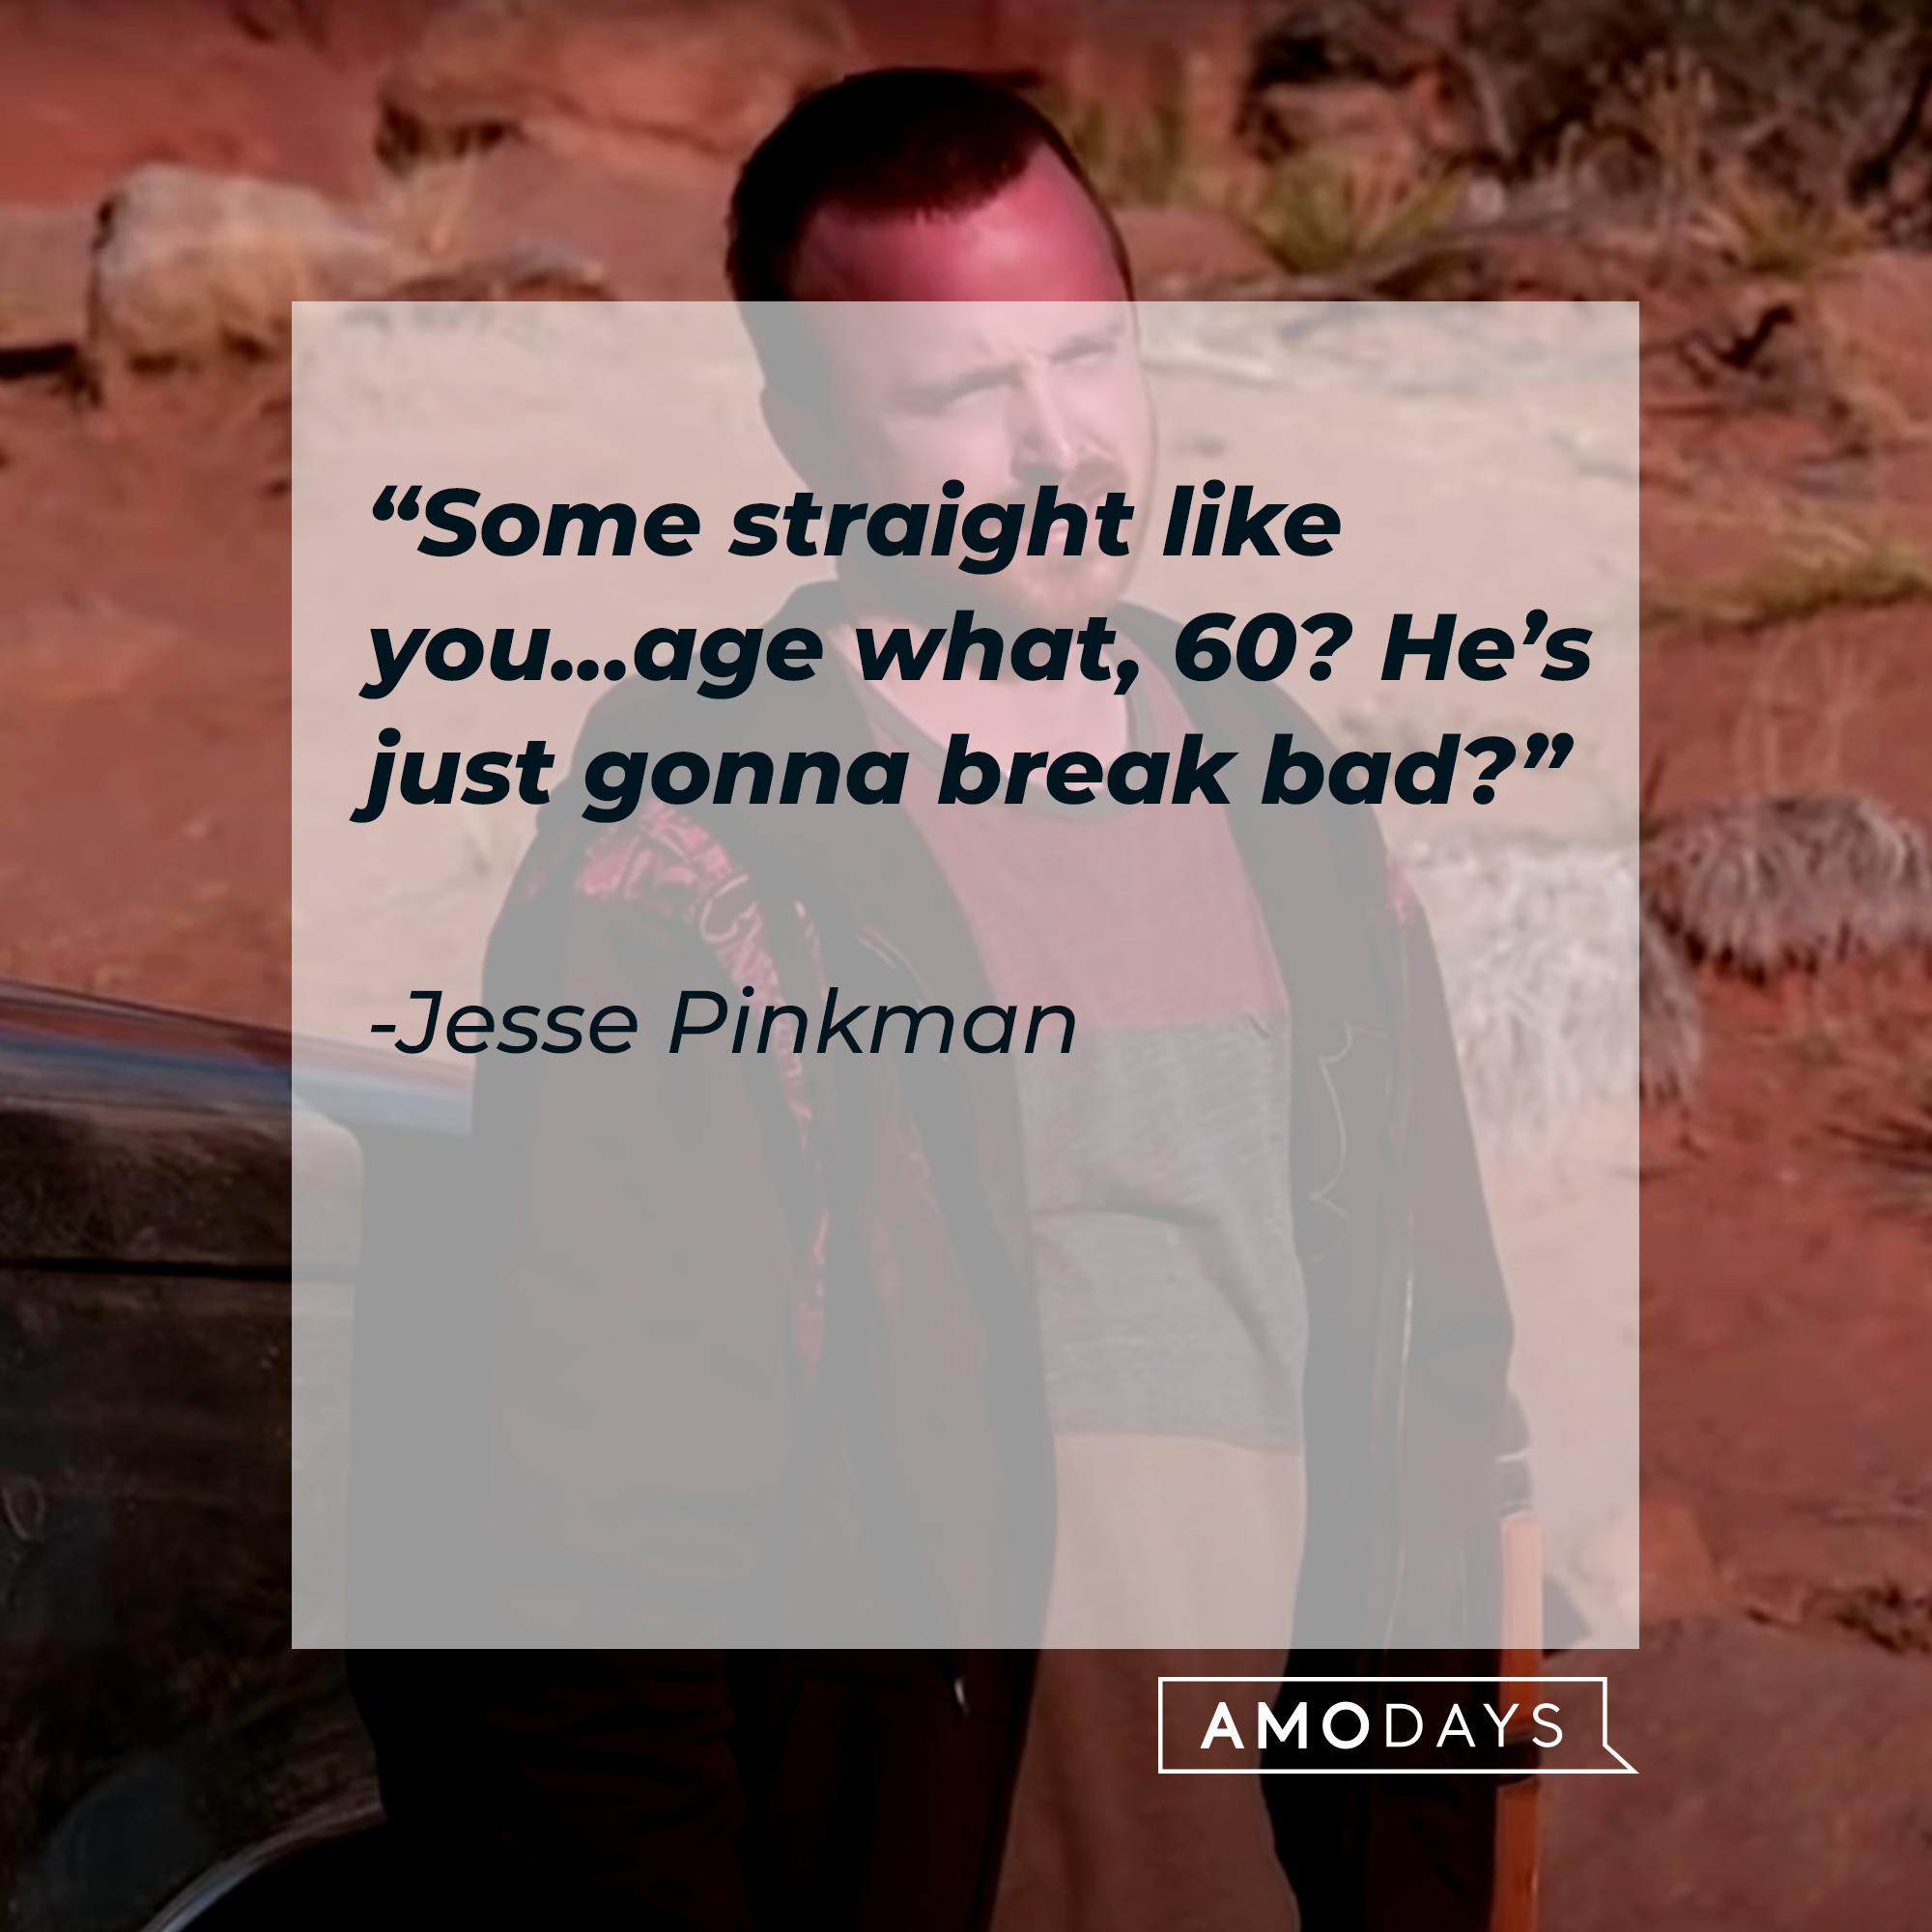 An image of Jesse Pinkman, with his quote: “Some straight like you... age what, 60? He’s just gonna break bad?” | Source: Youtube.com/breakingbad